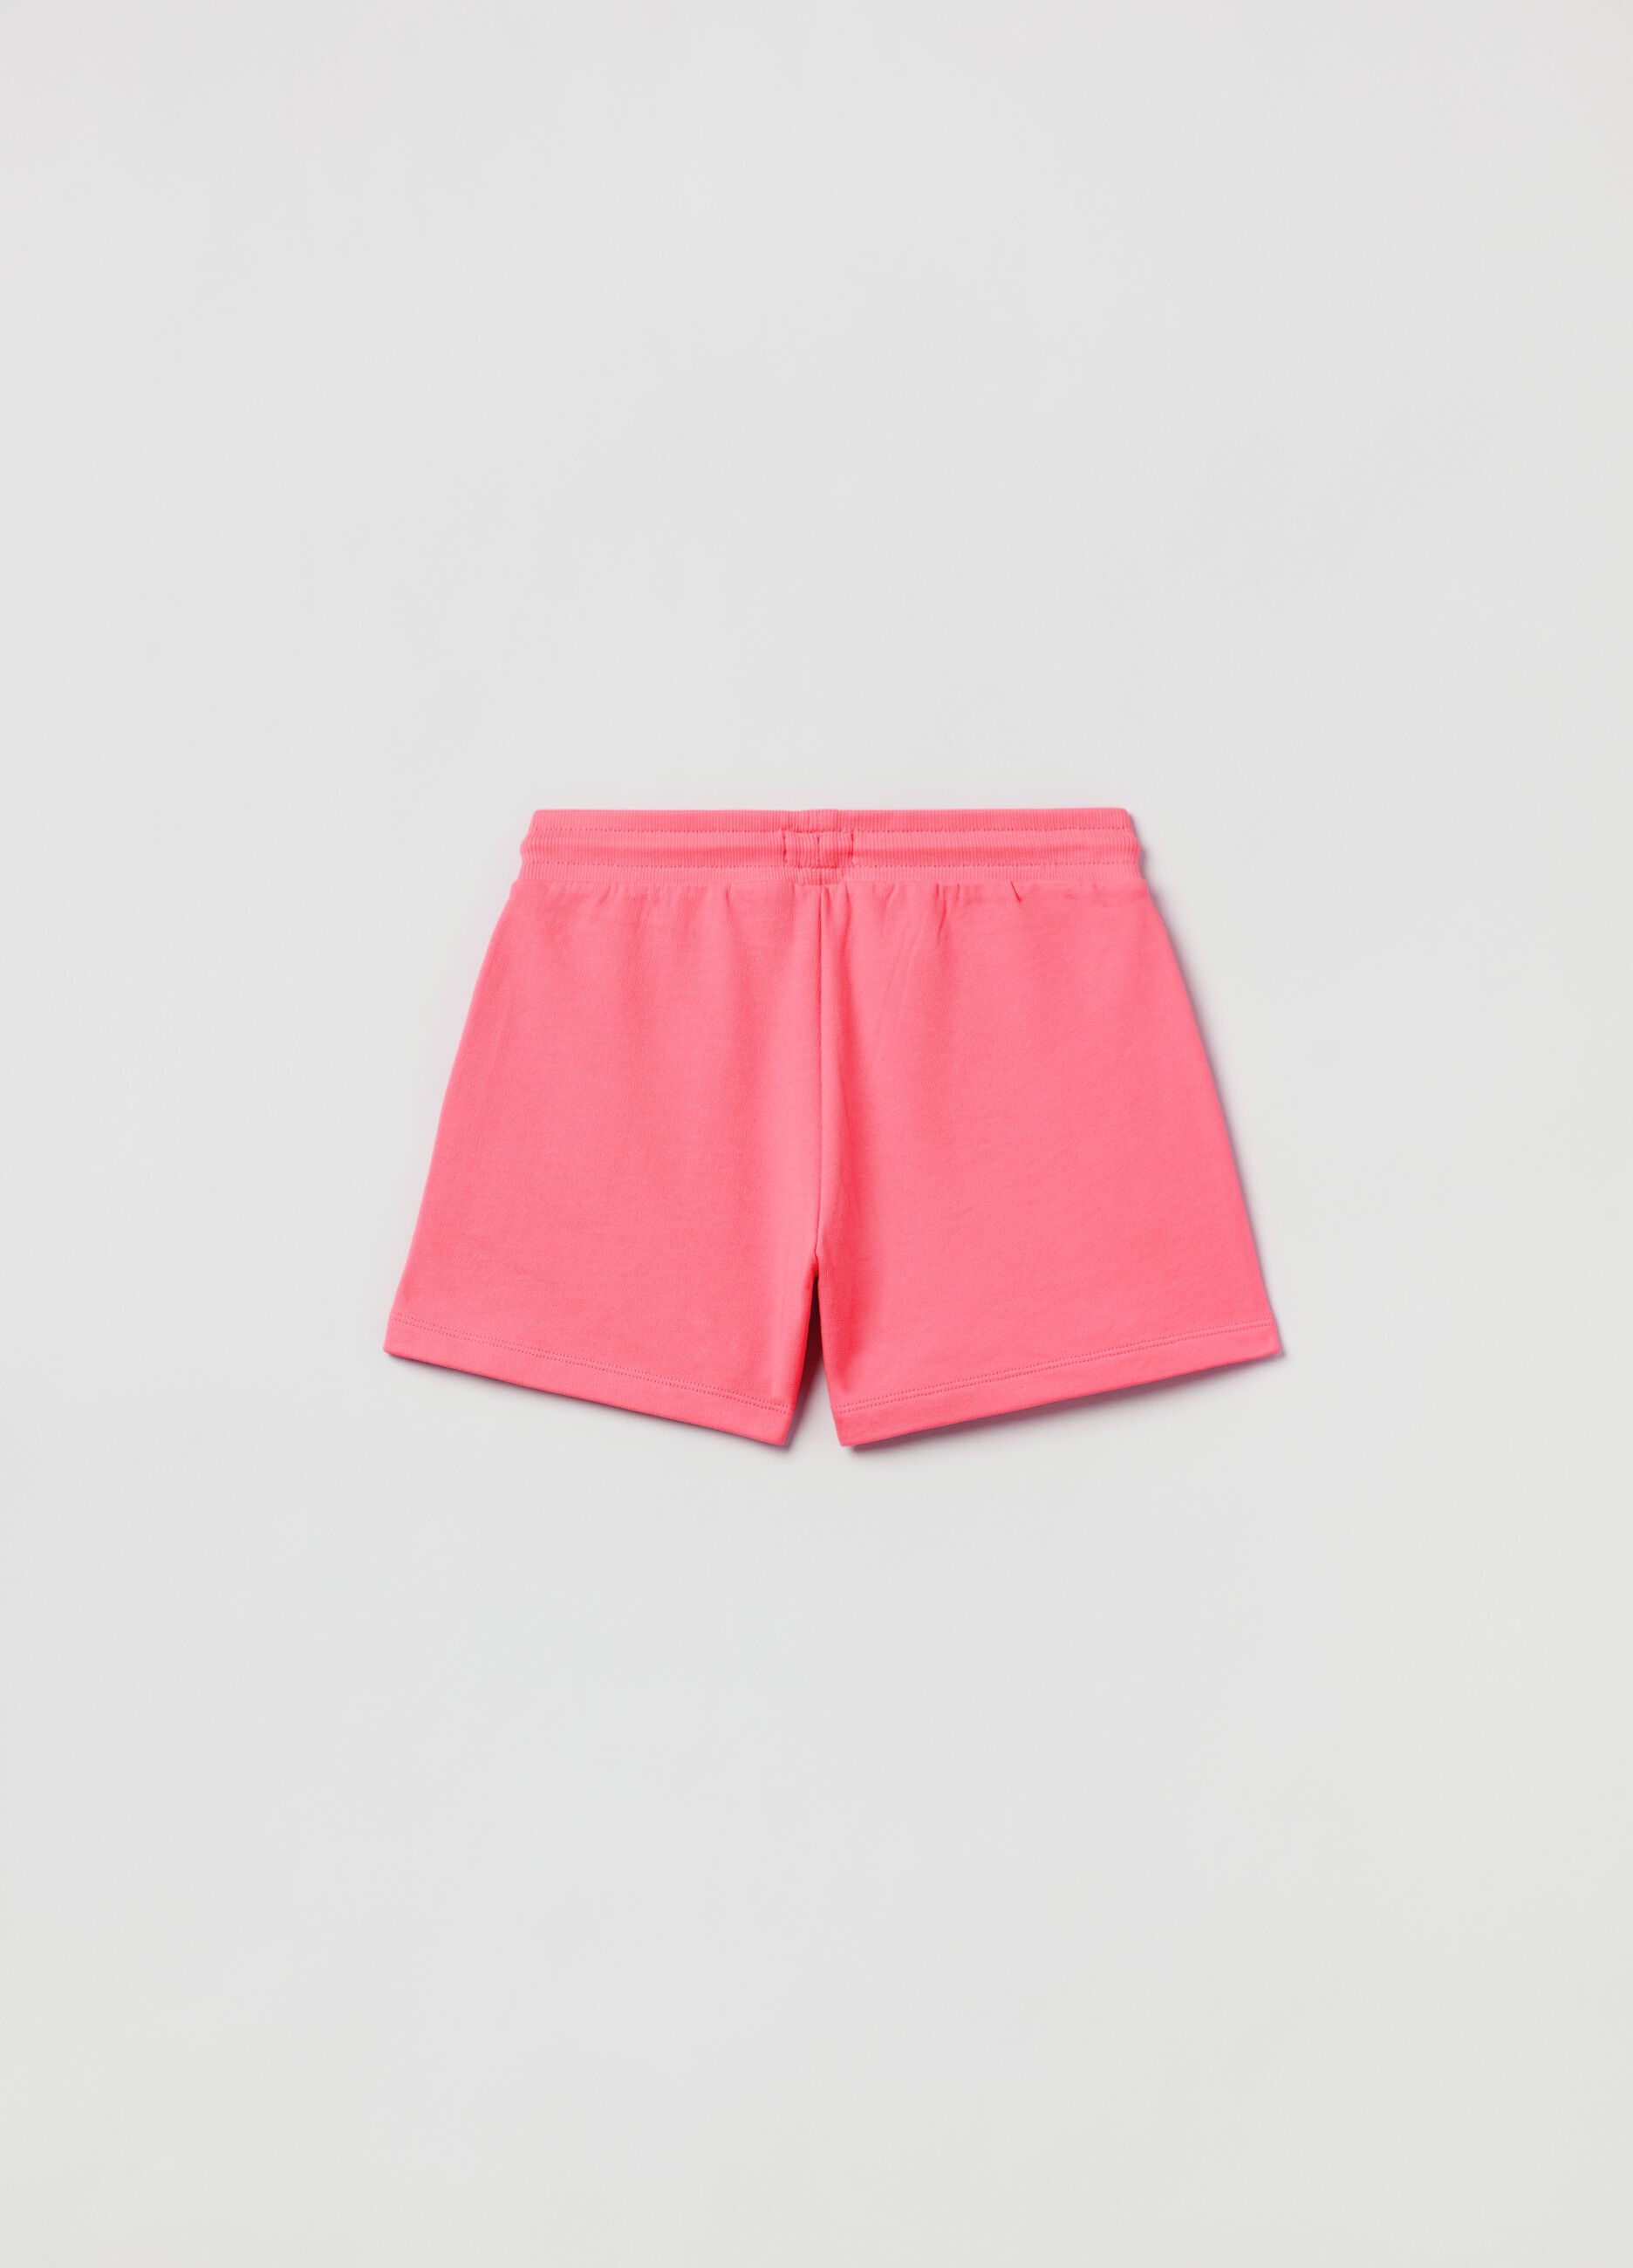 Fitness shorts with drawstring